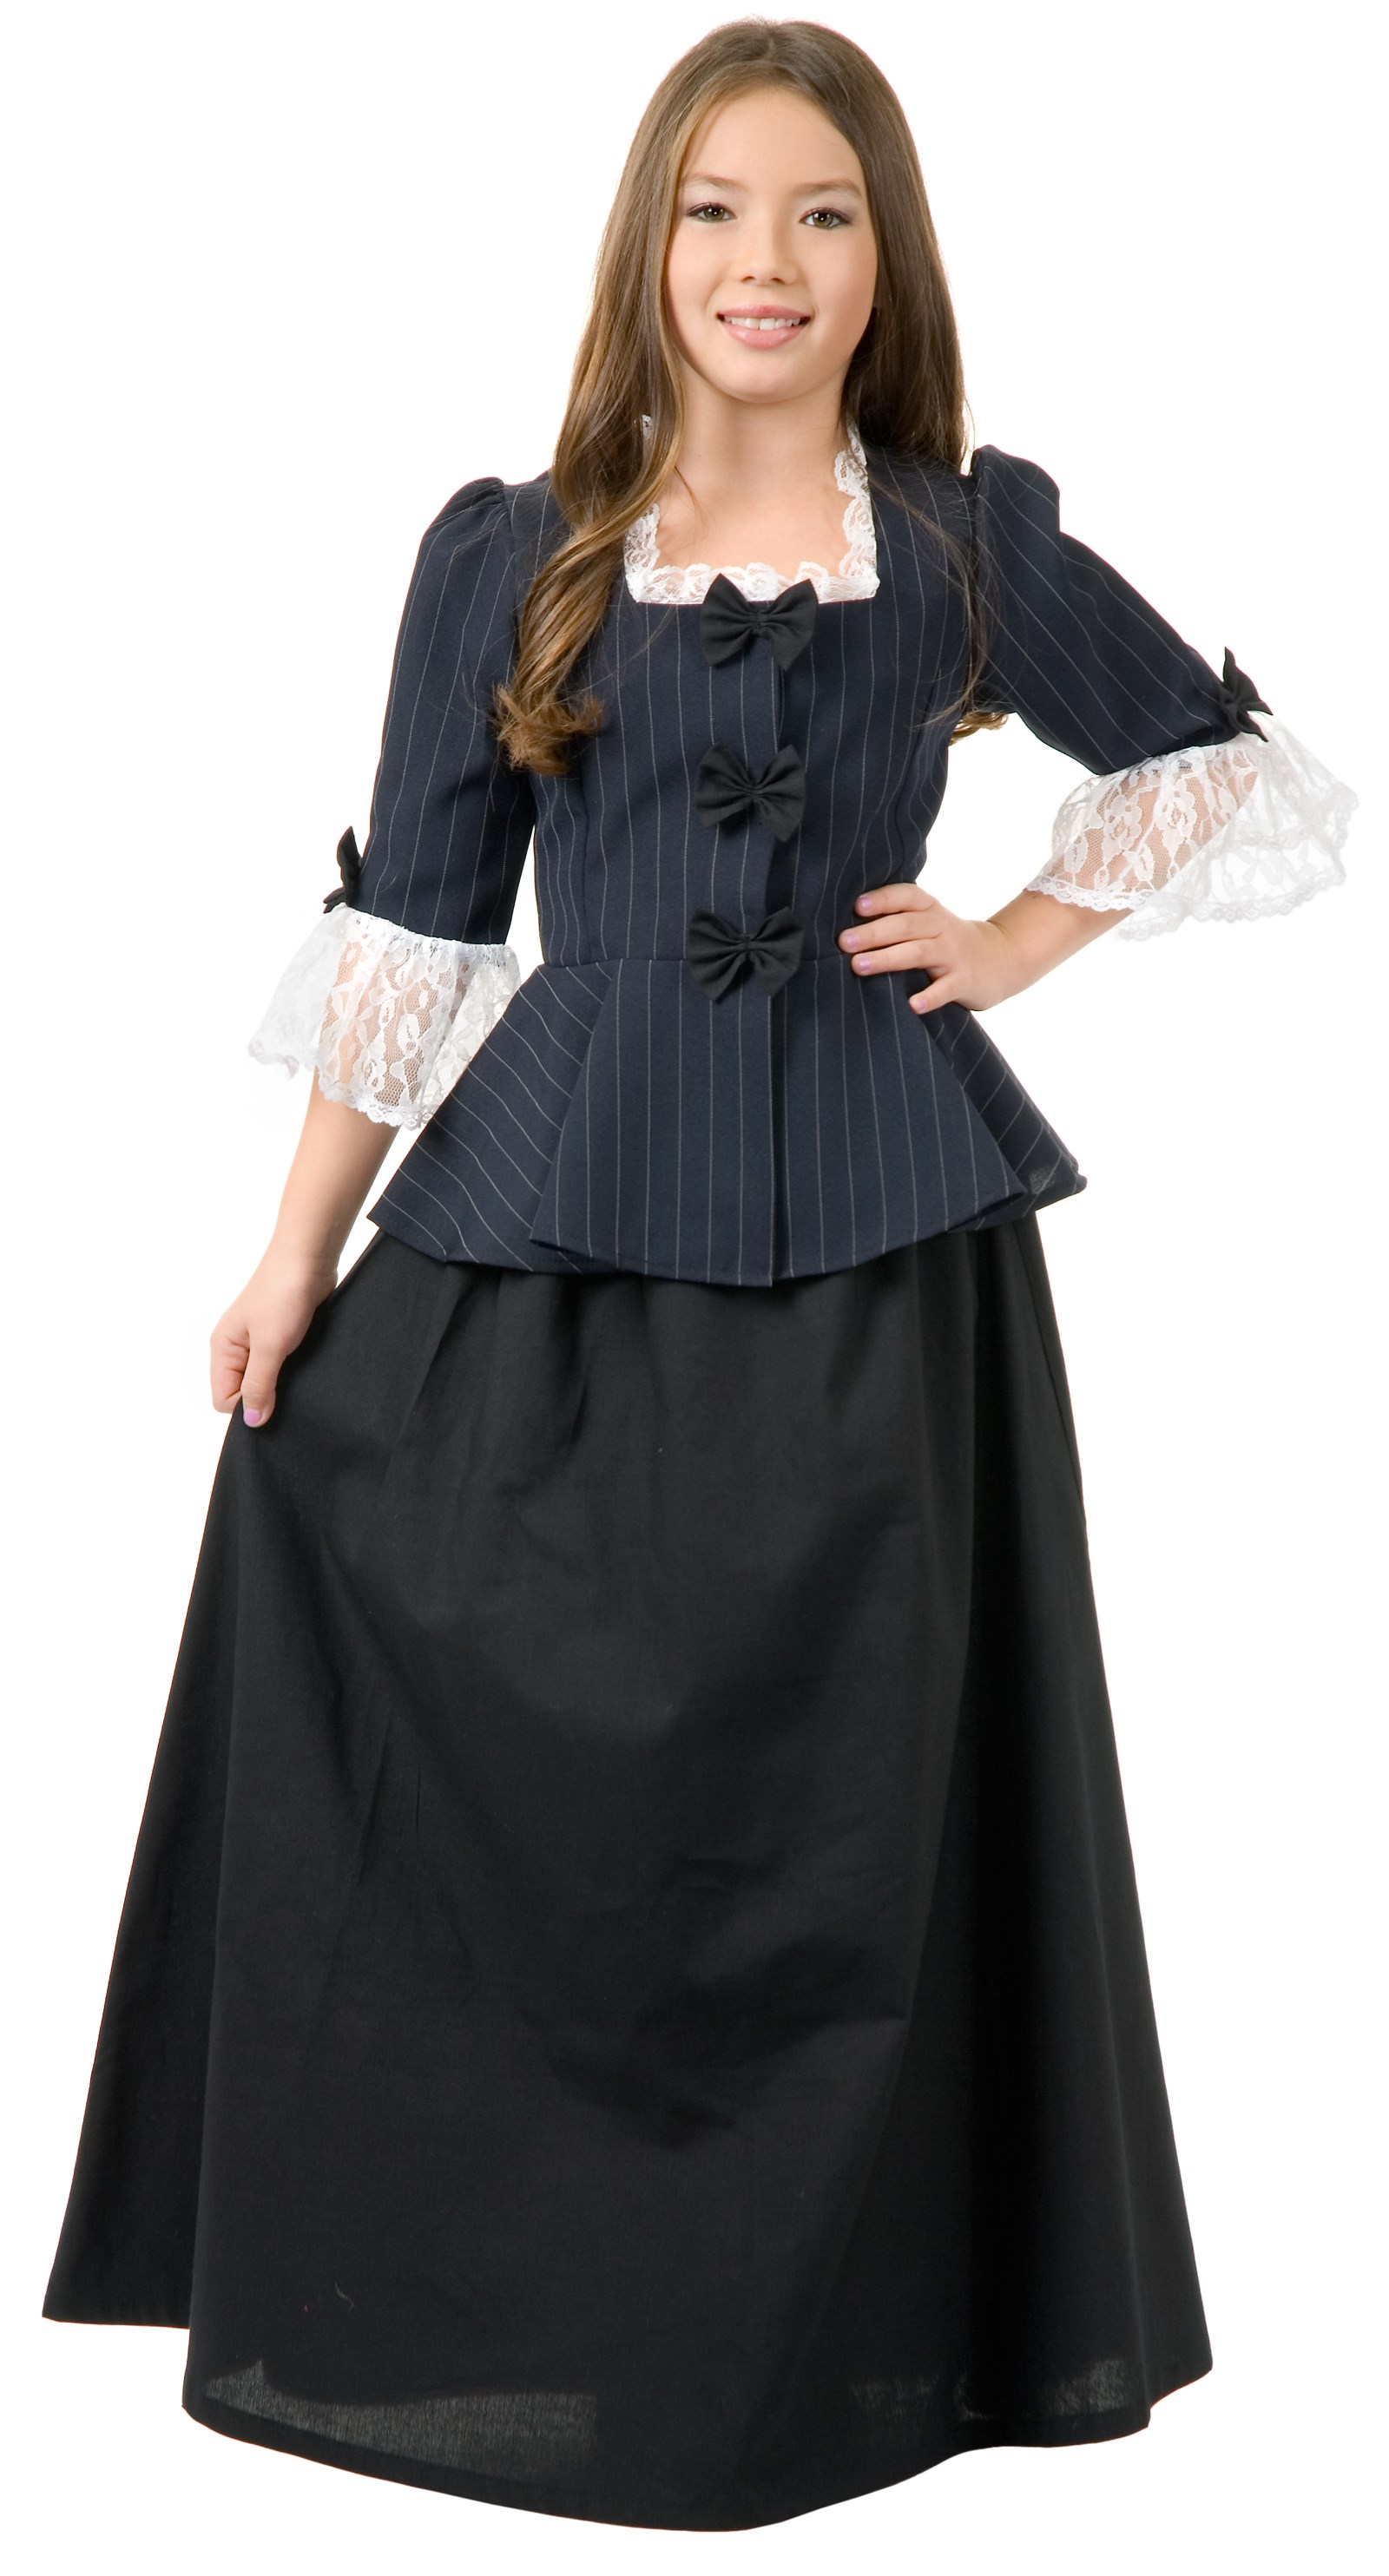 Colonial Girl Child Costume - BuyCostumes.com